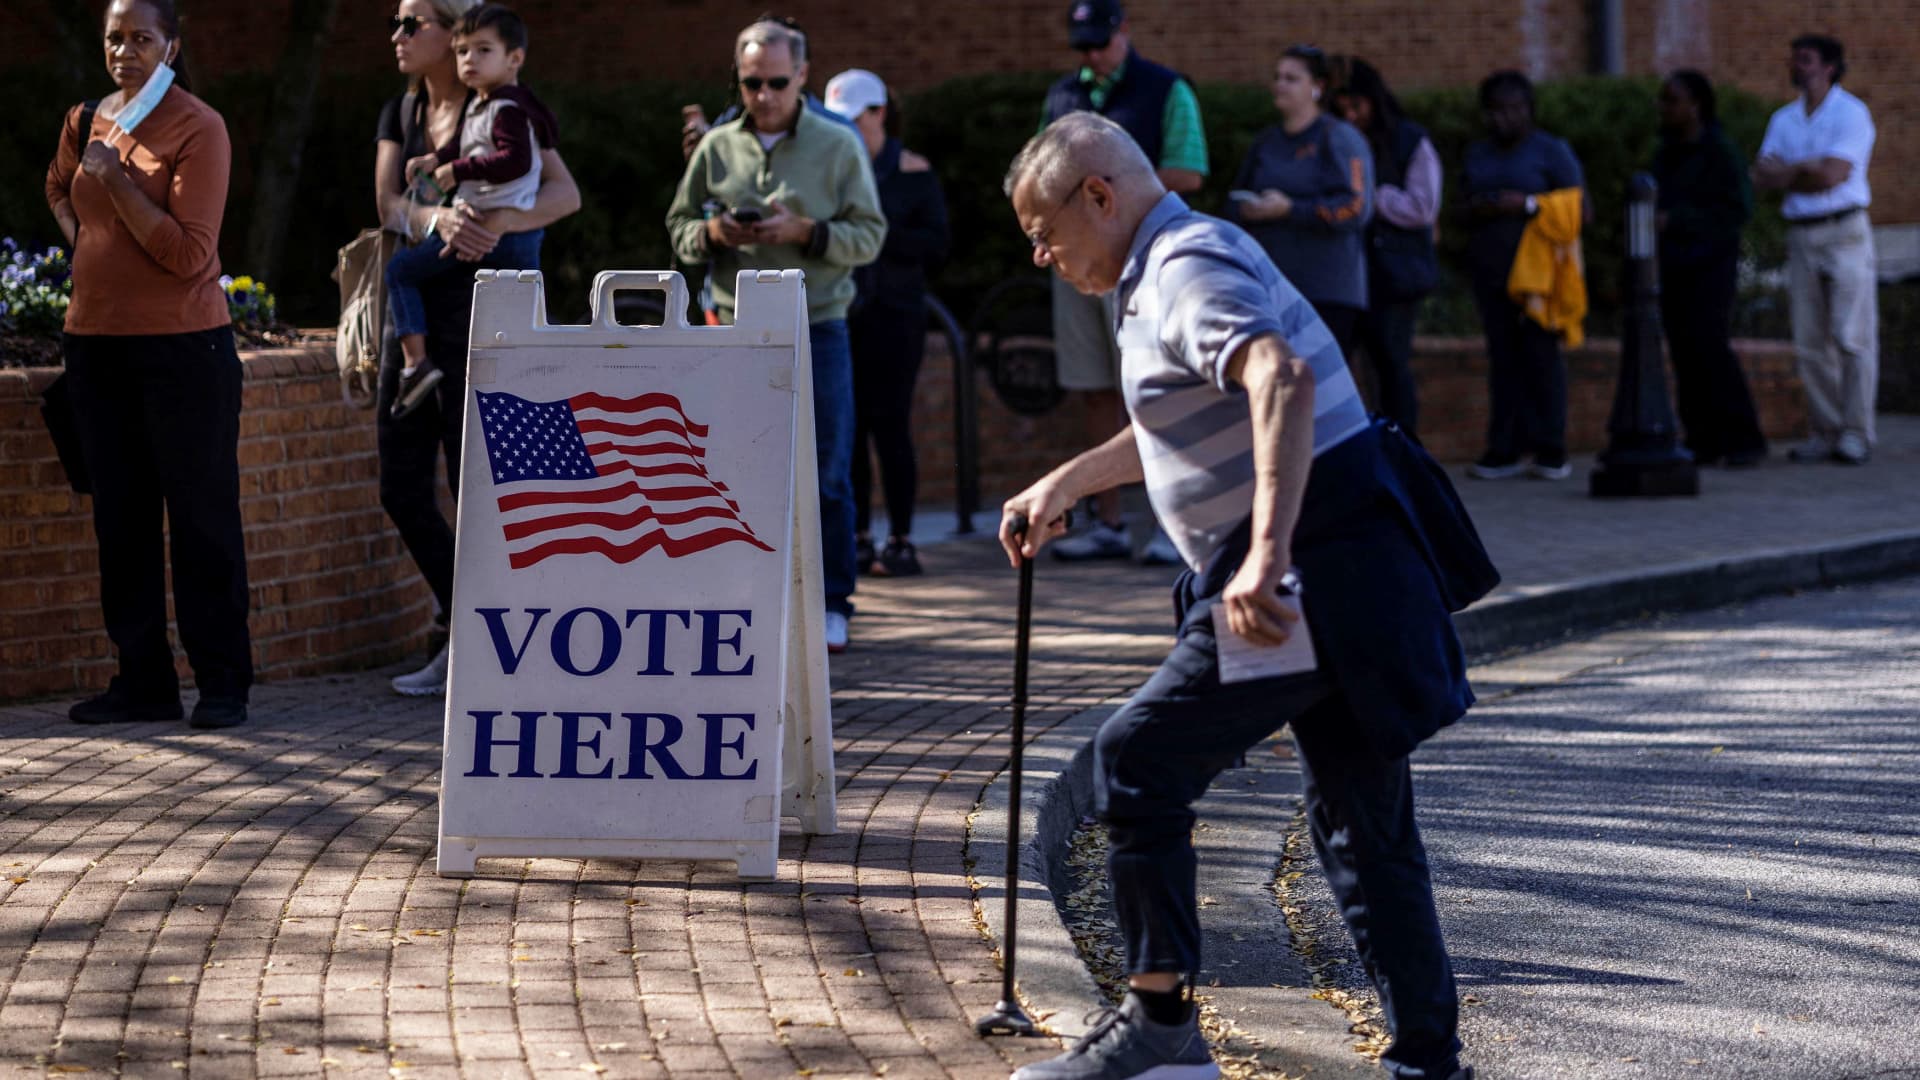 A man arrives to cast his ballot during early voting for the midterm elections at the Smyrna Community Center in Smyrna, Georgia, November 4, 2022.